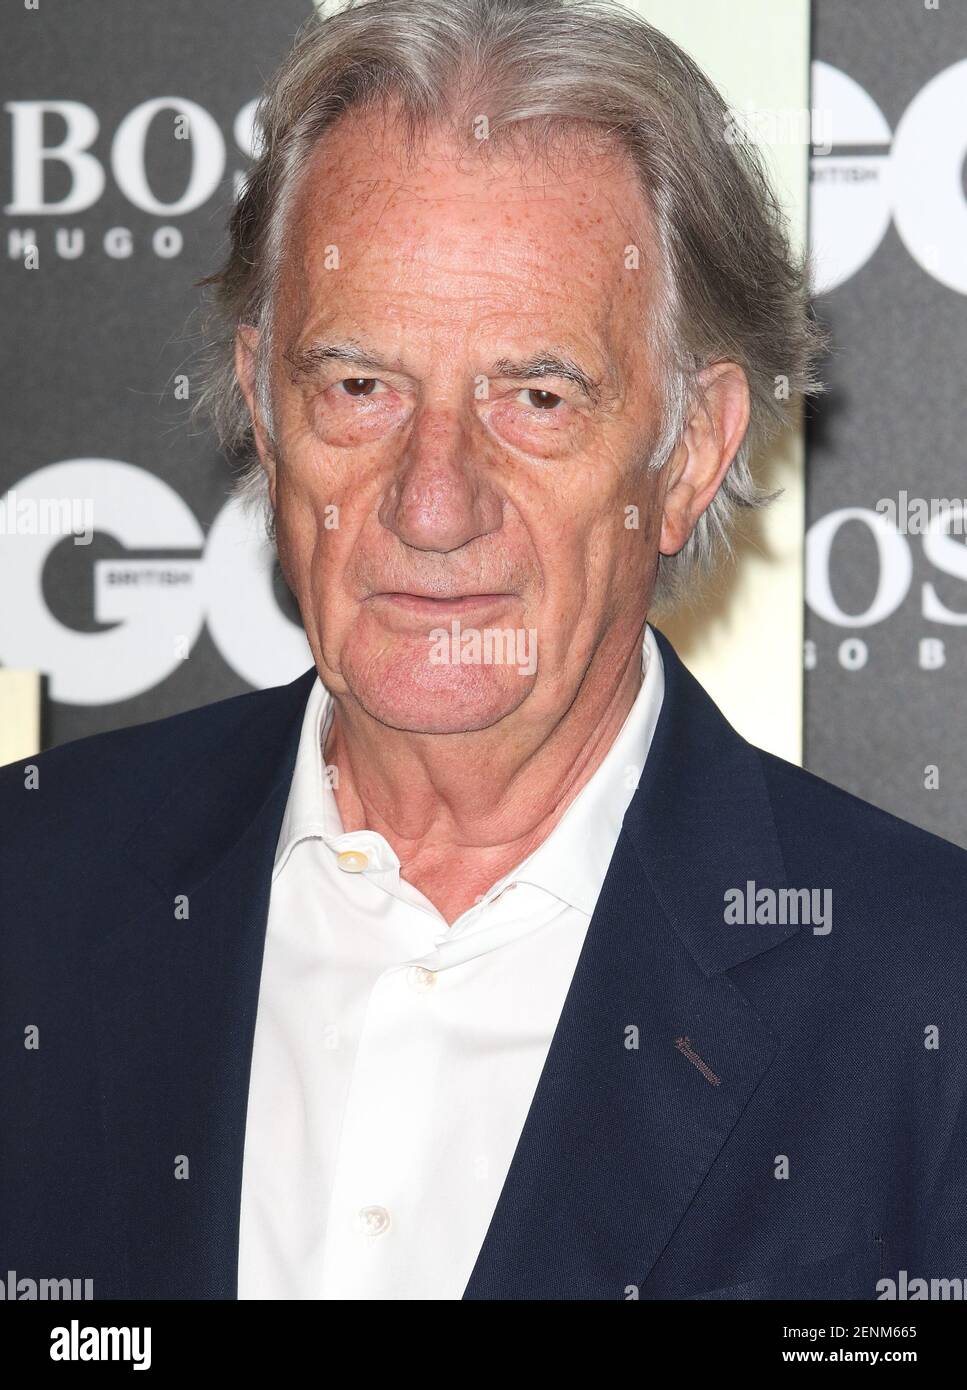 Sir Paul Smith attends the GQ Men of the Year Awards held at the Tate ...